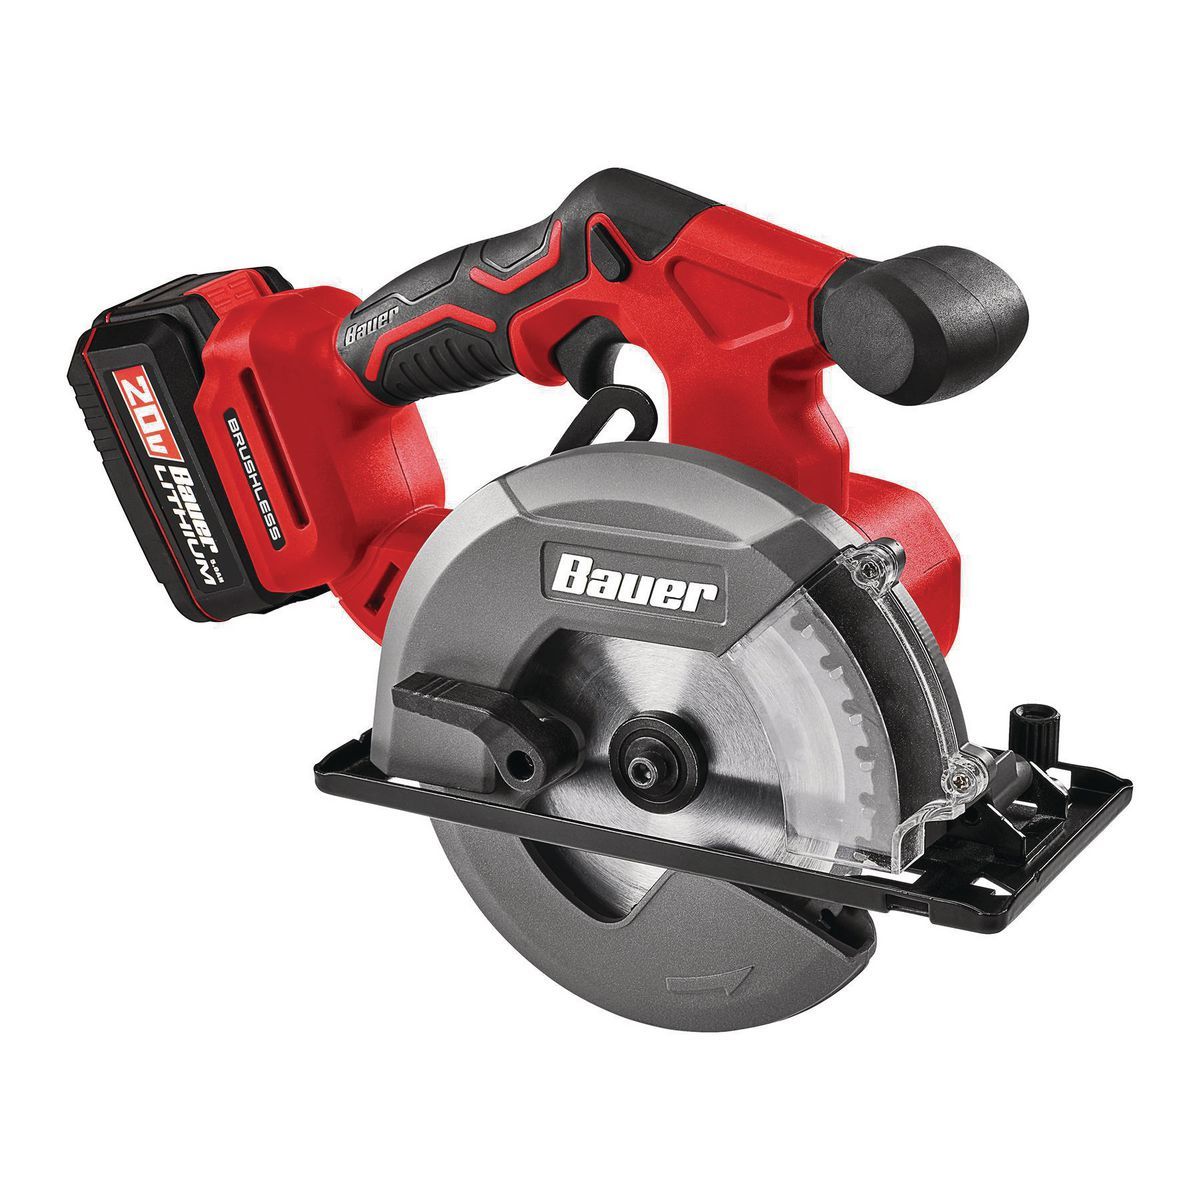 BAUER 20V Brushless Cordless 5-3/8 in. Metal Cutting Circular Saw - Tool Only